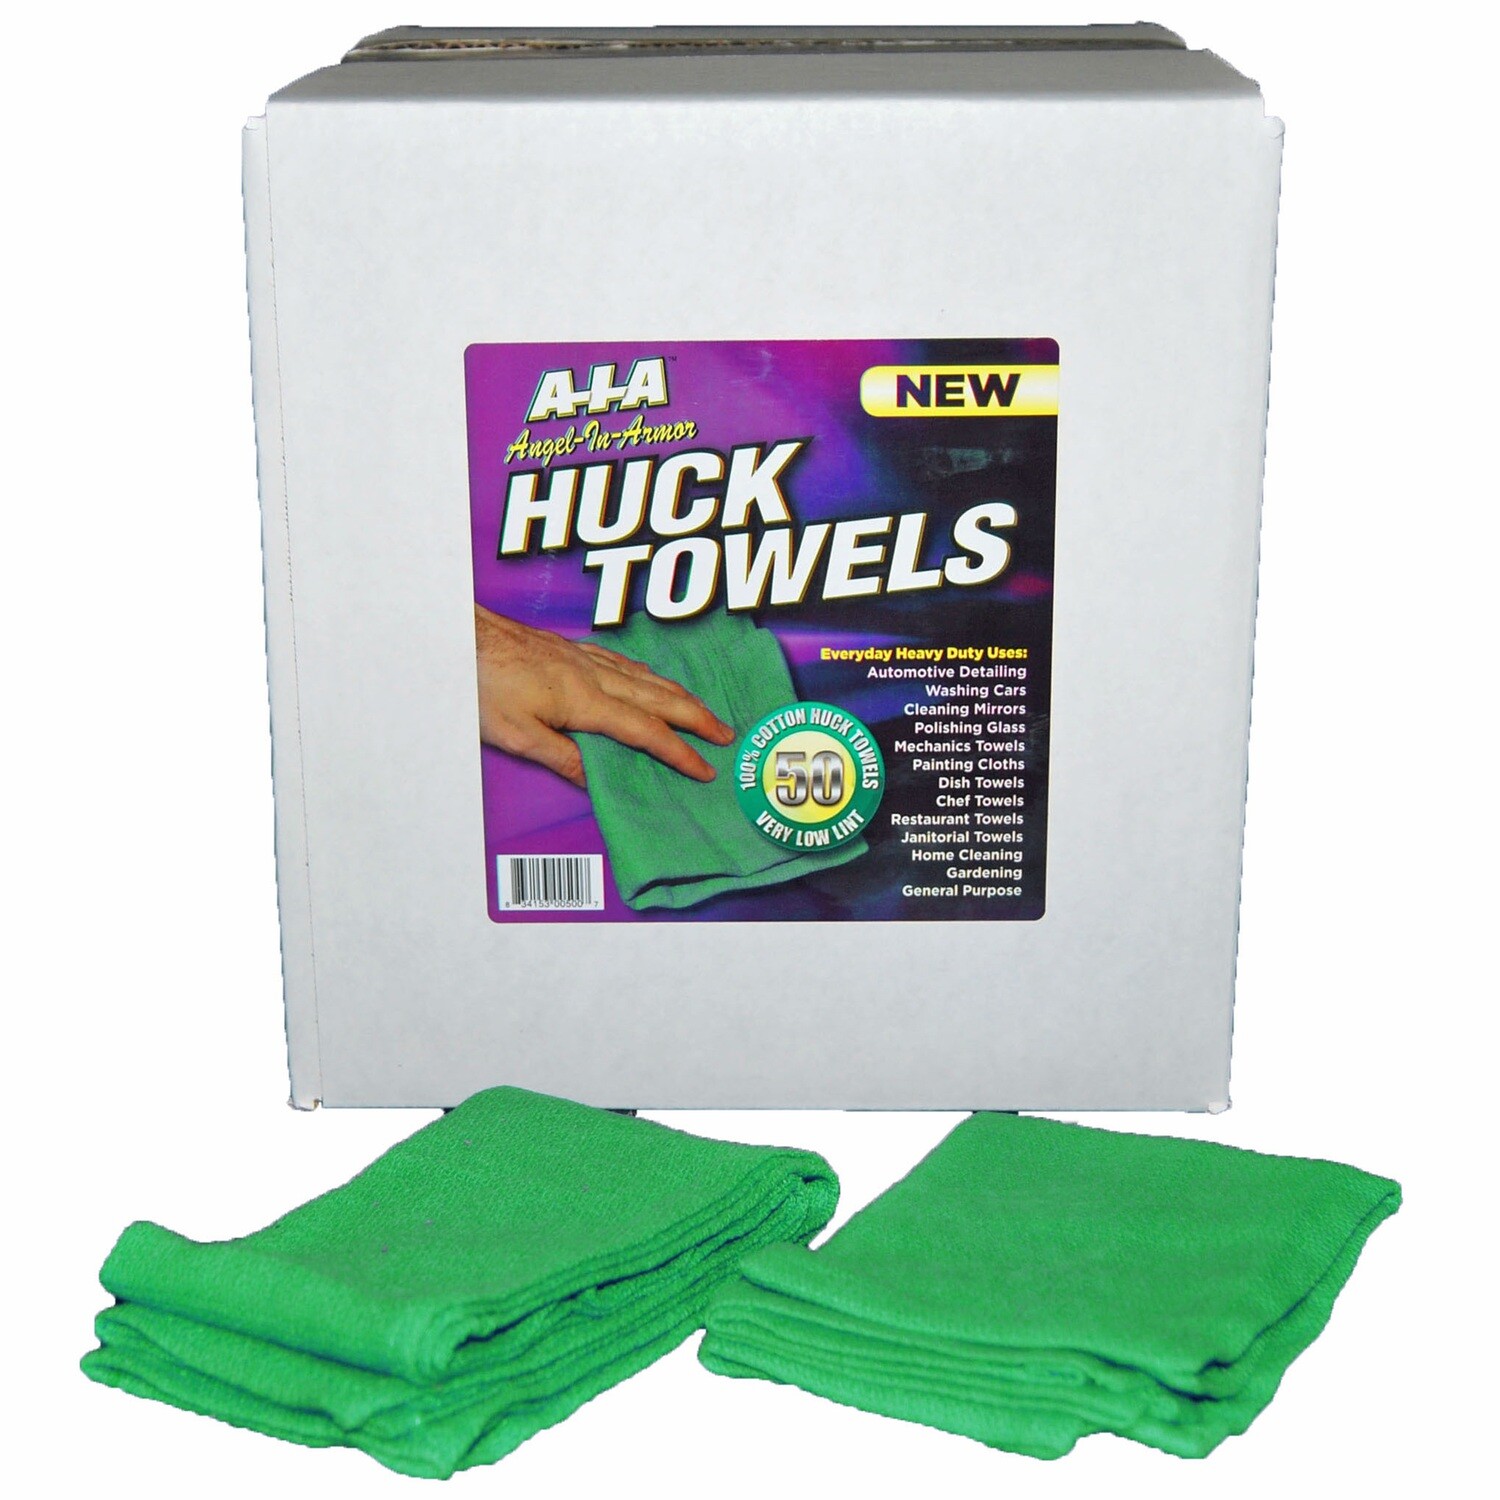 50 New Blue Huck Surgical Towels